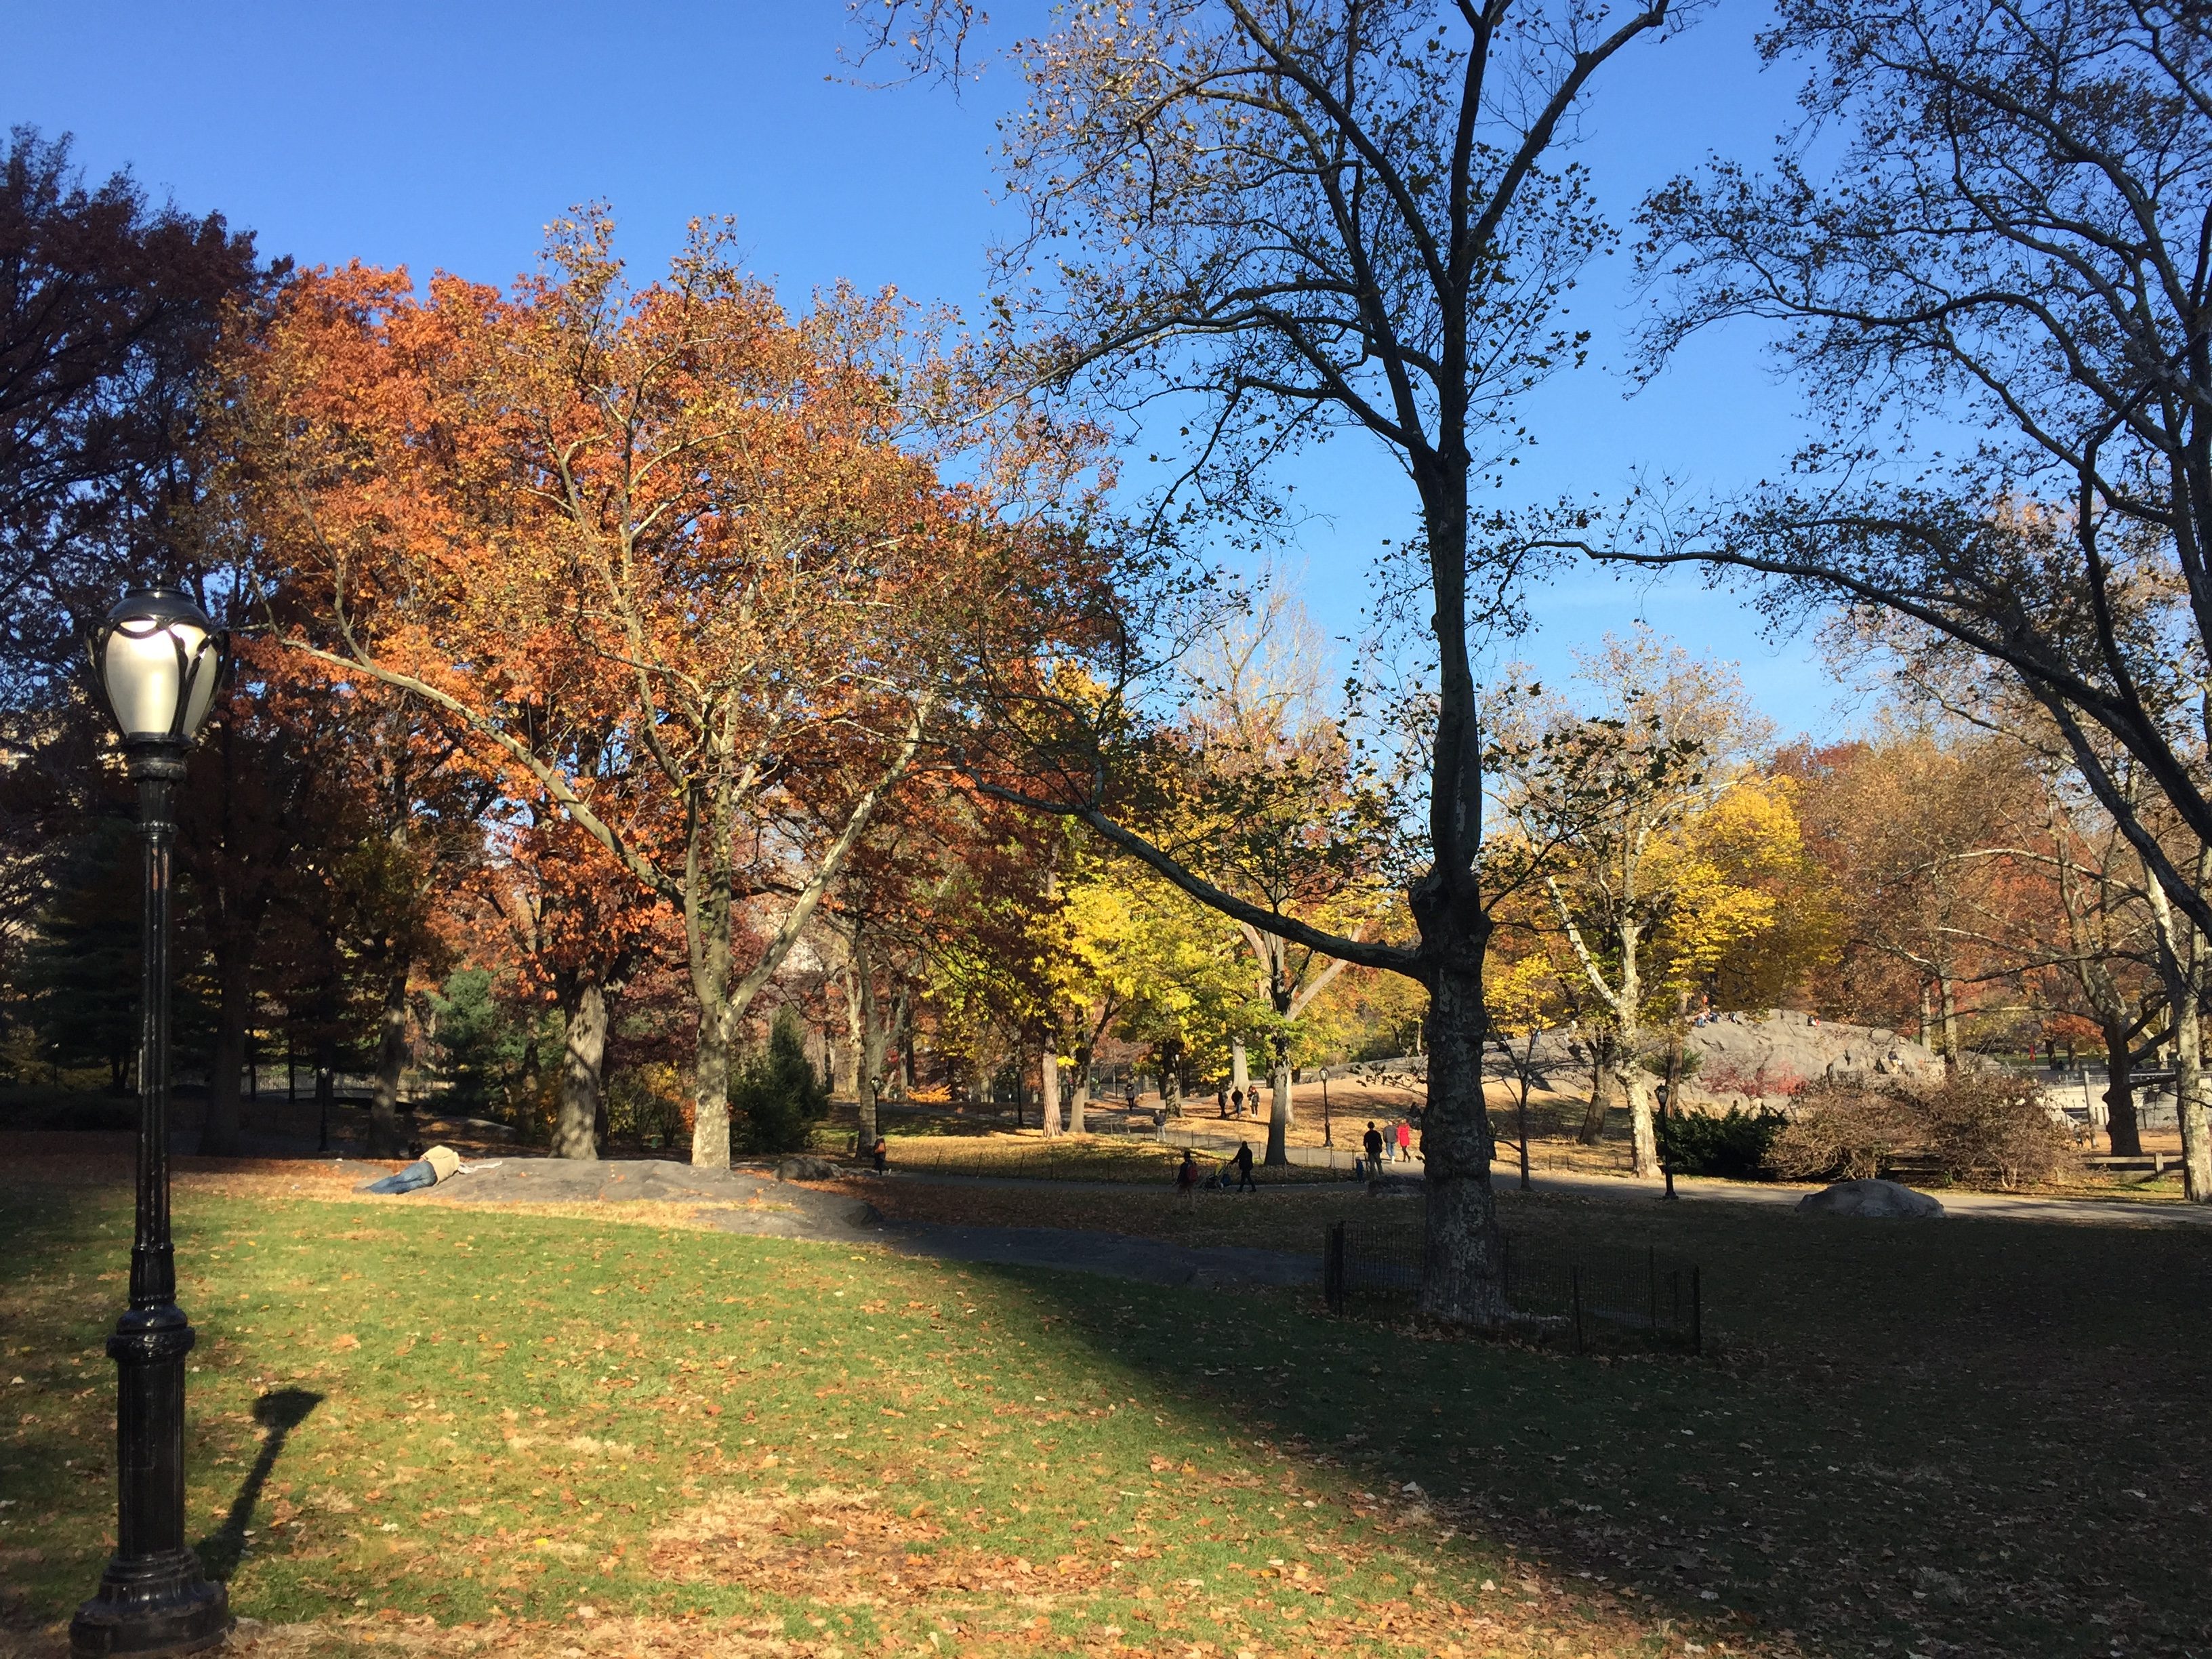 Lawn in Central Park